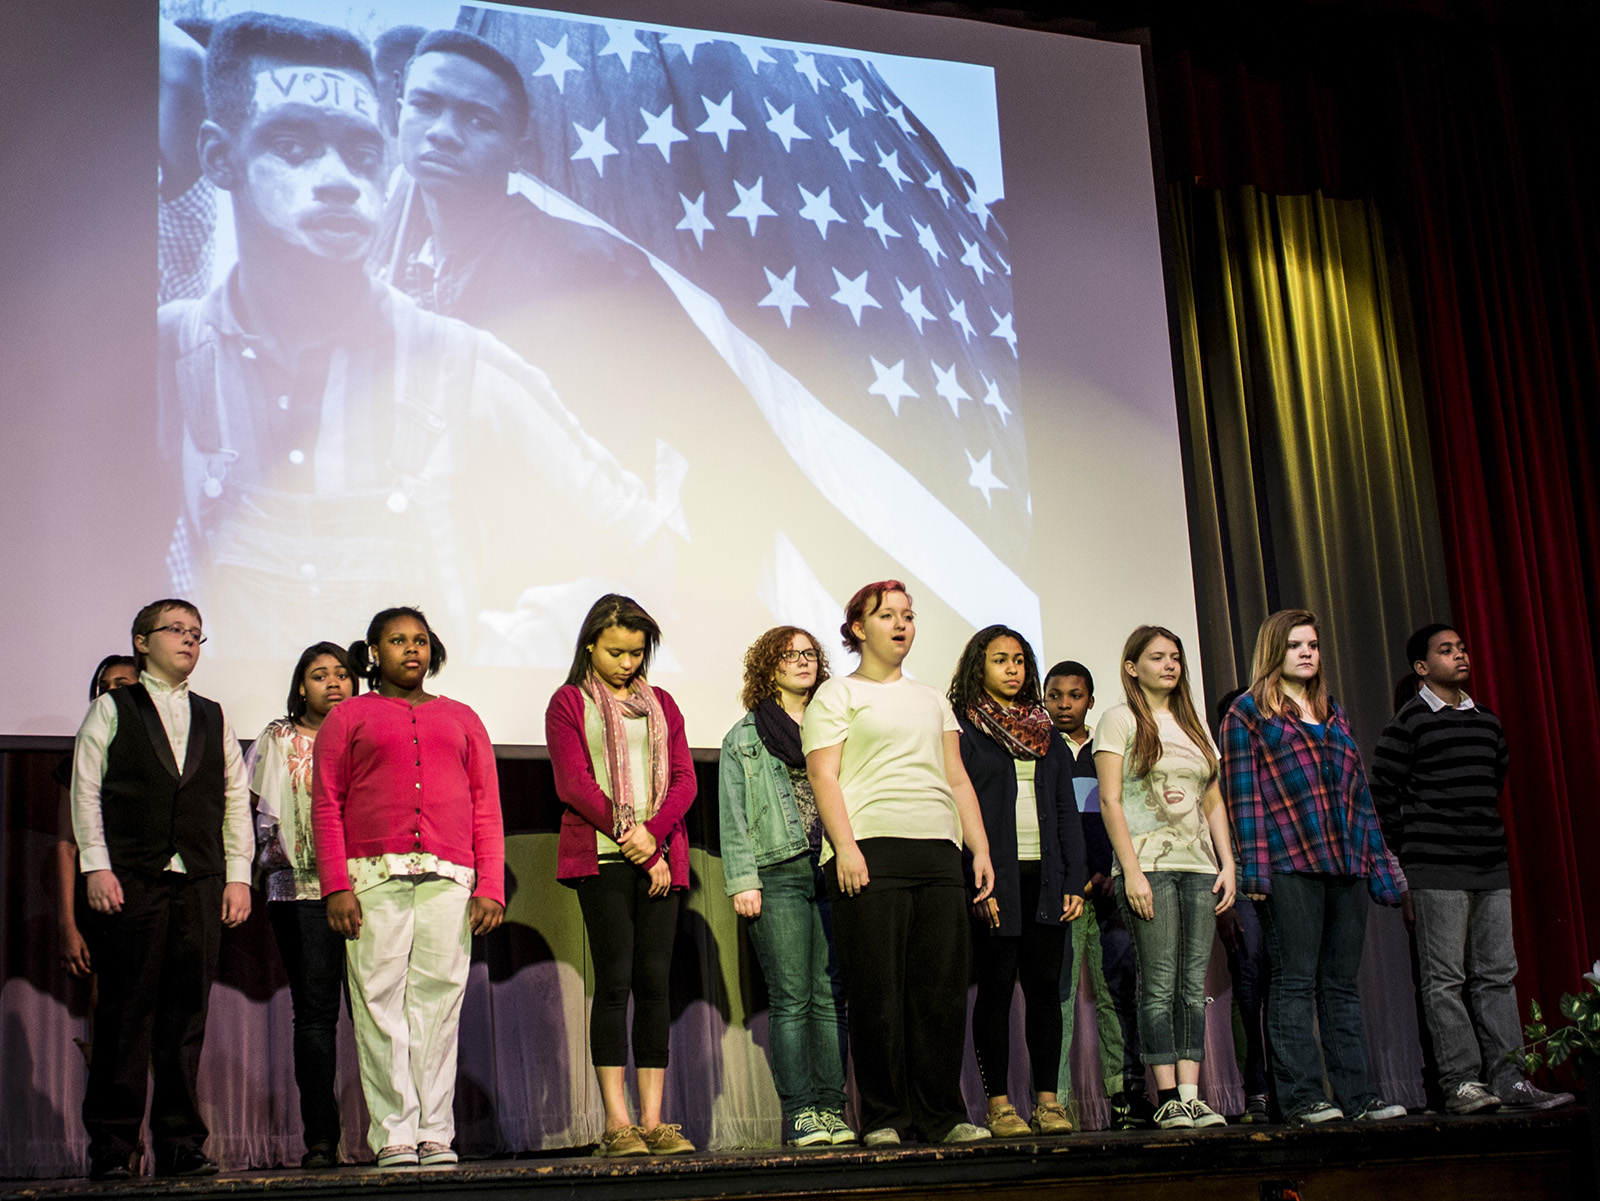 Photo by  Adam Hill Children at Alton Middle School sing “Swing Low, Sweet Chariot” at Alton Middle School’s Cultural Day event.